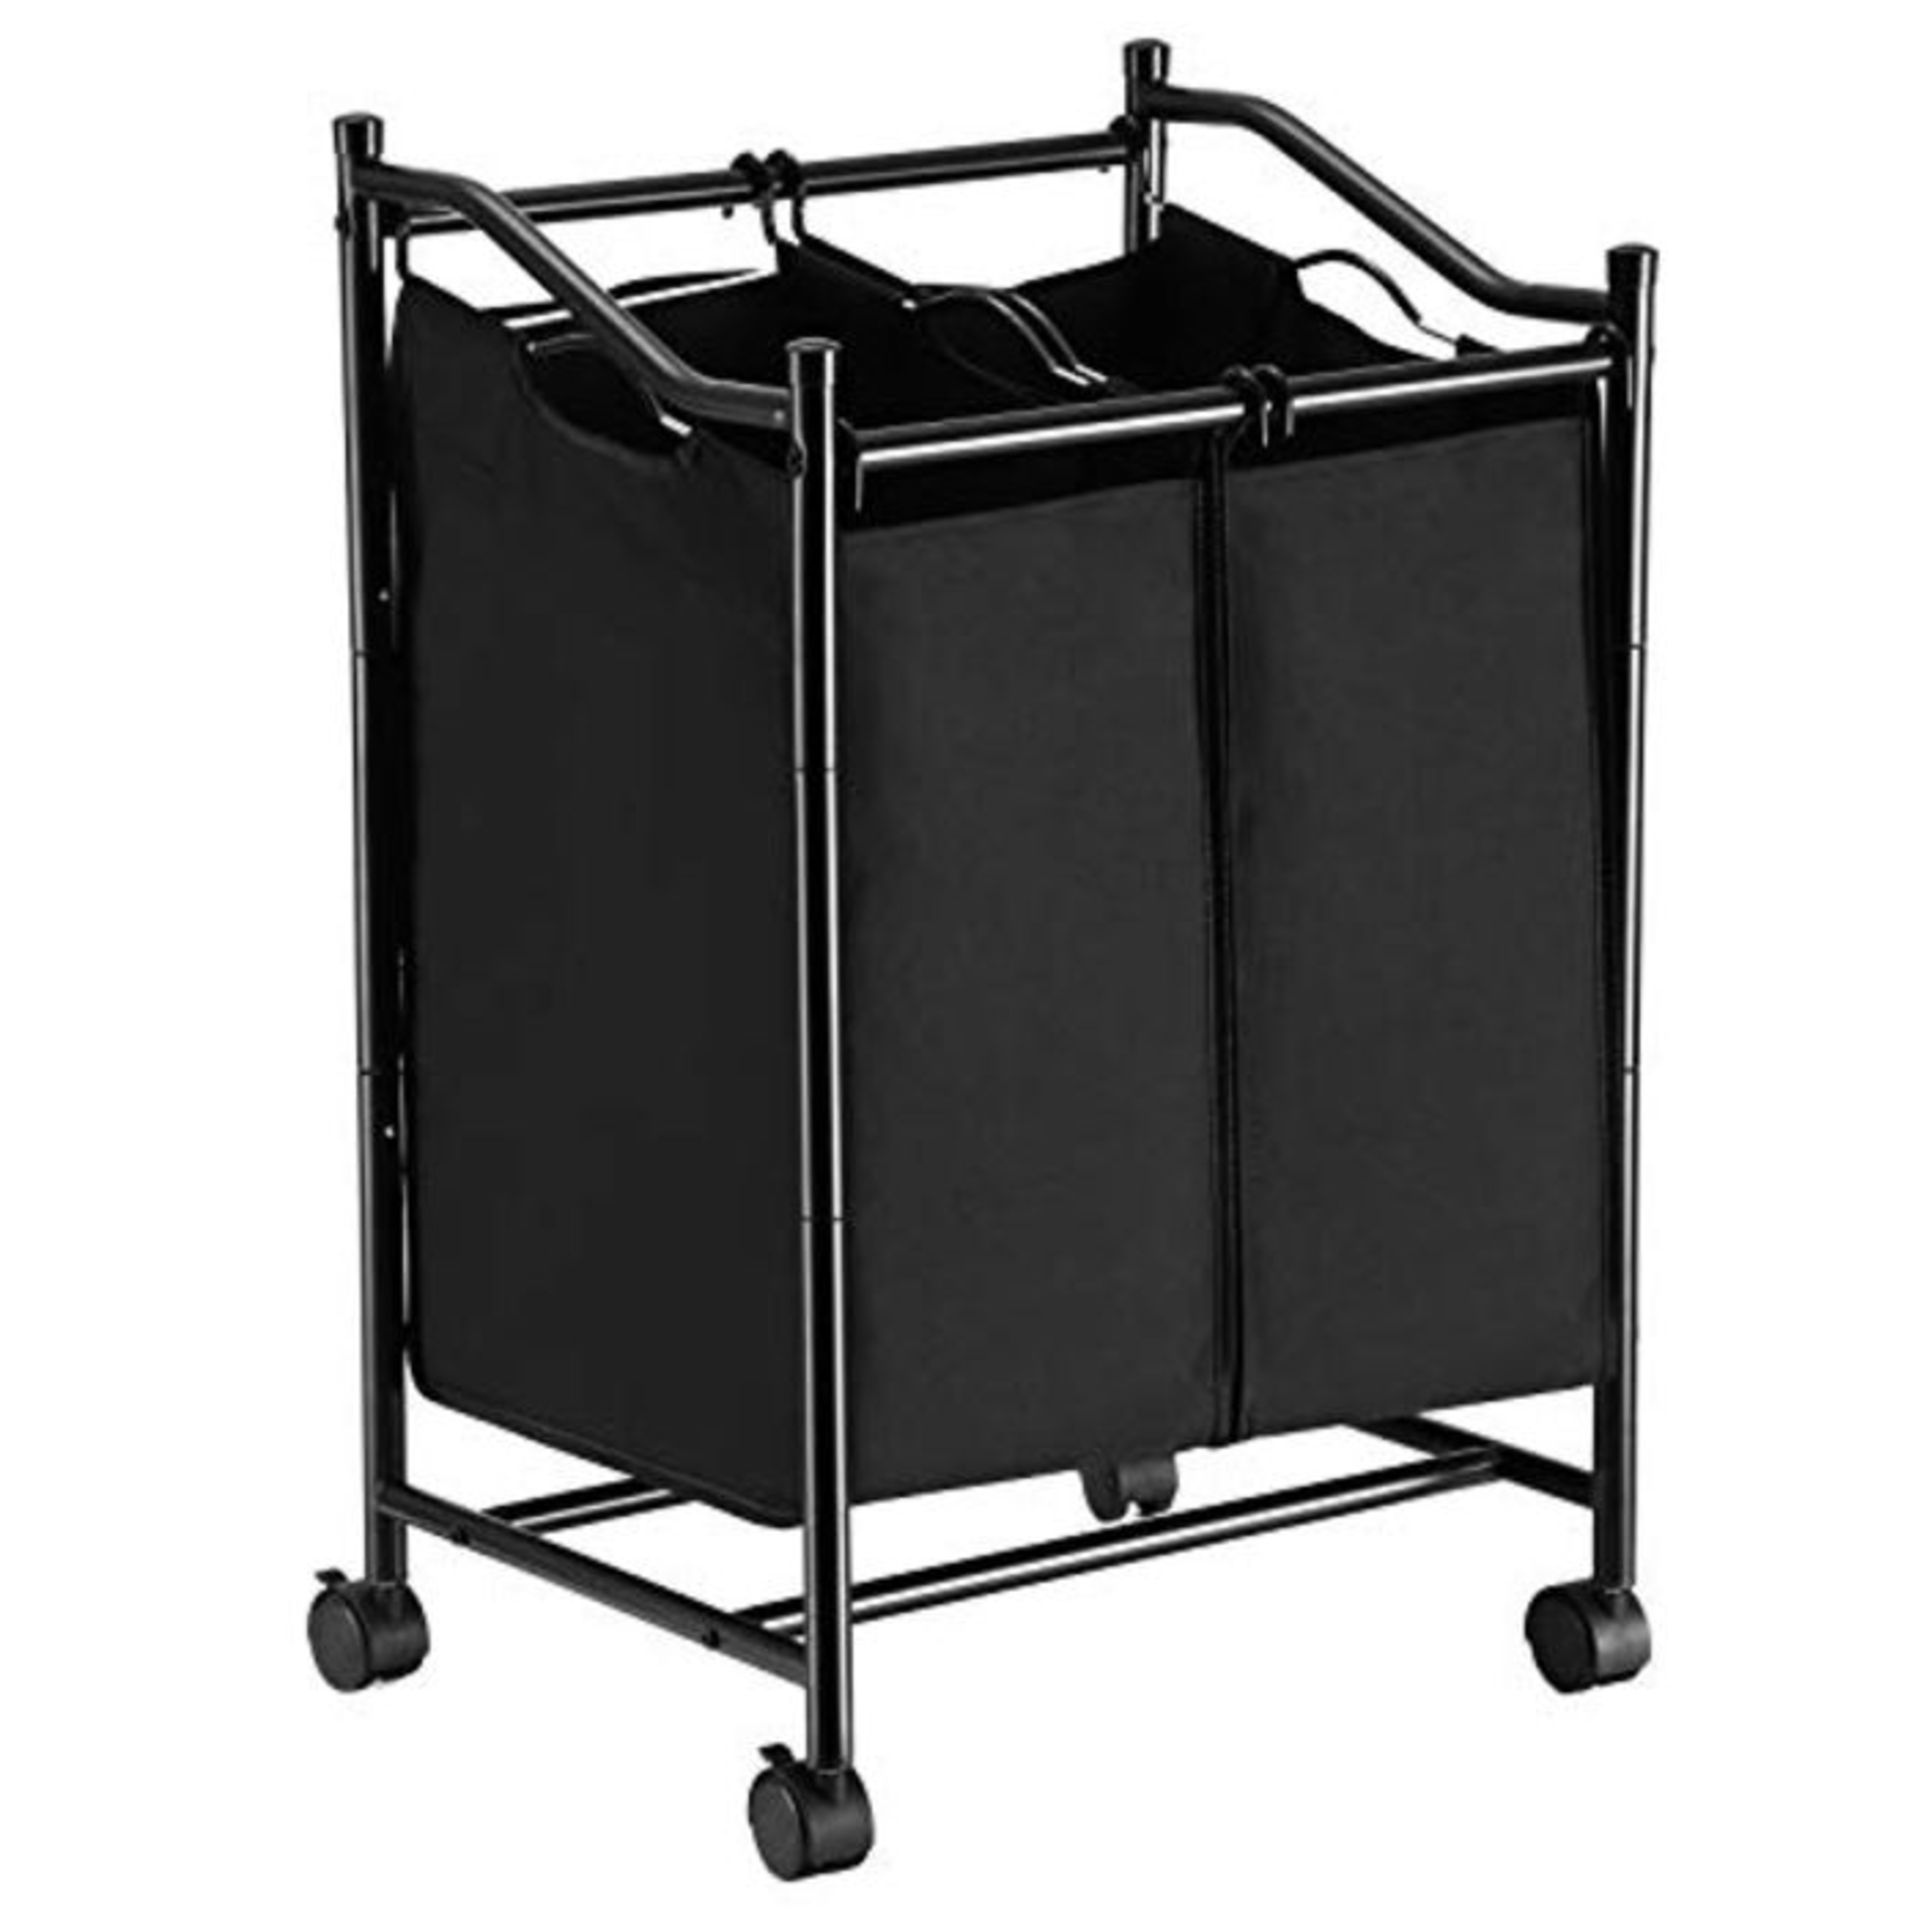 [CRACKED] SONGMICS 2 Rolling Sorter, Laundry Basket on Wheels, Hamper with Removable B